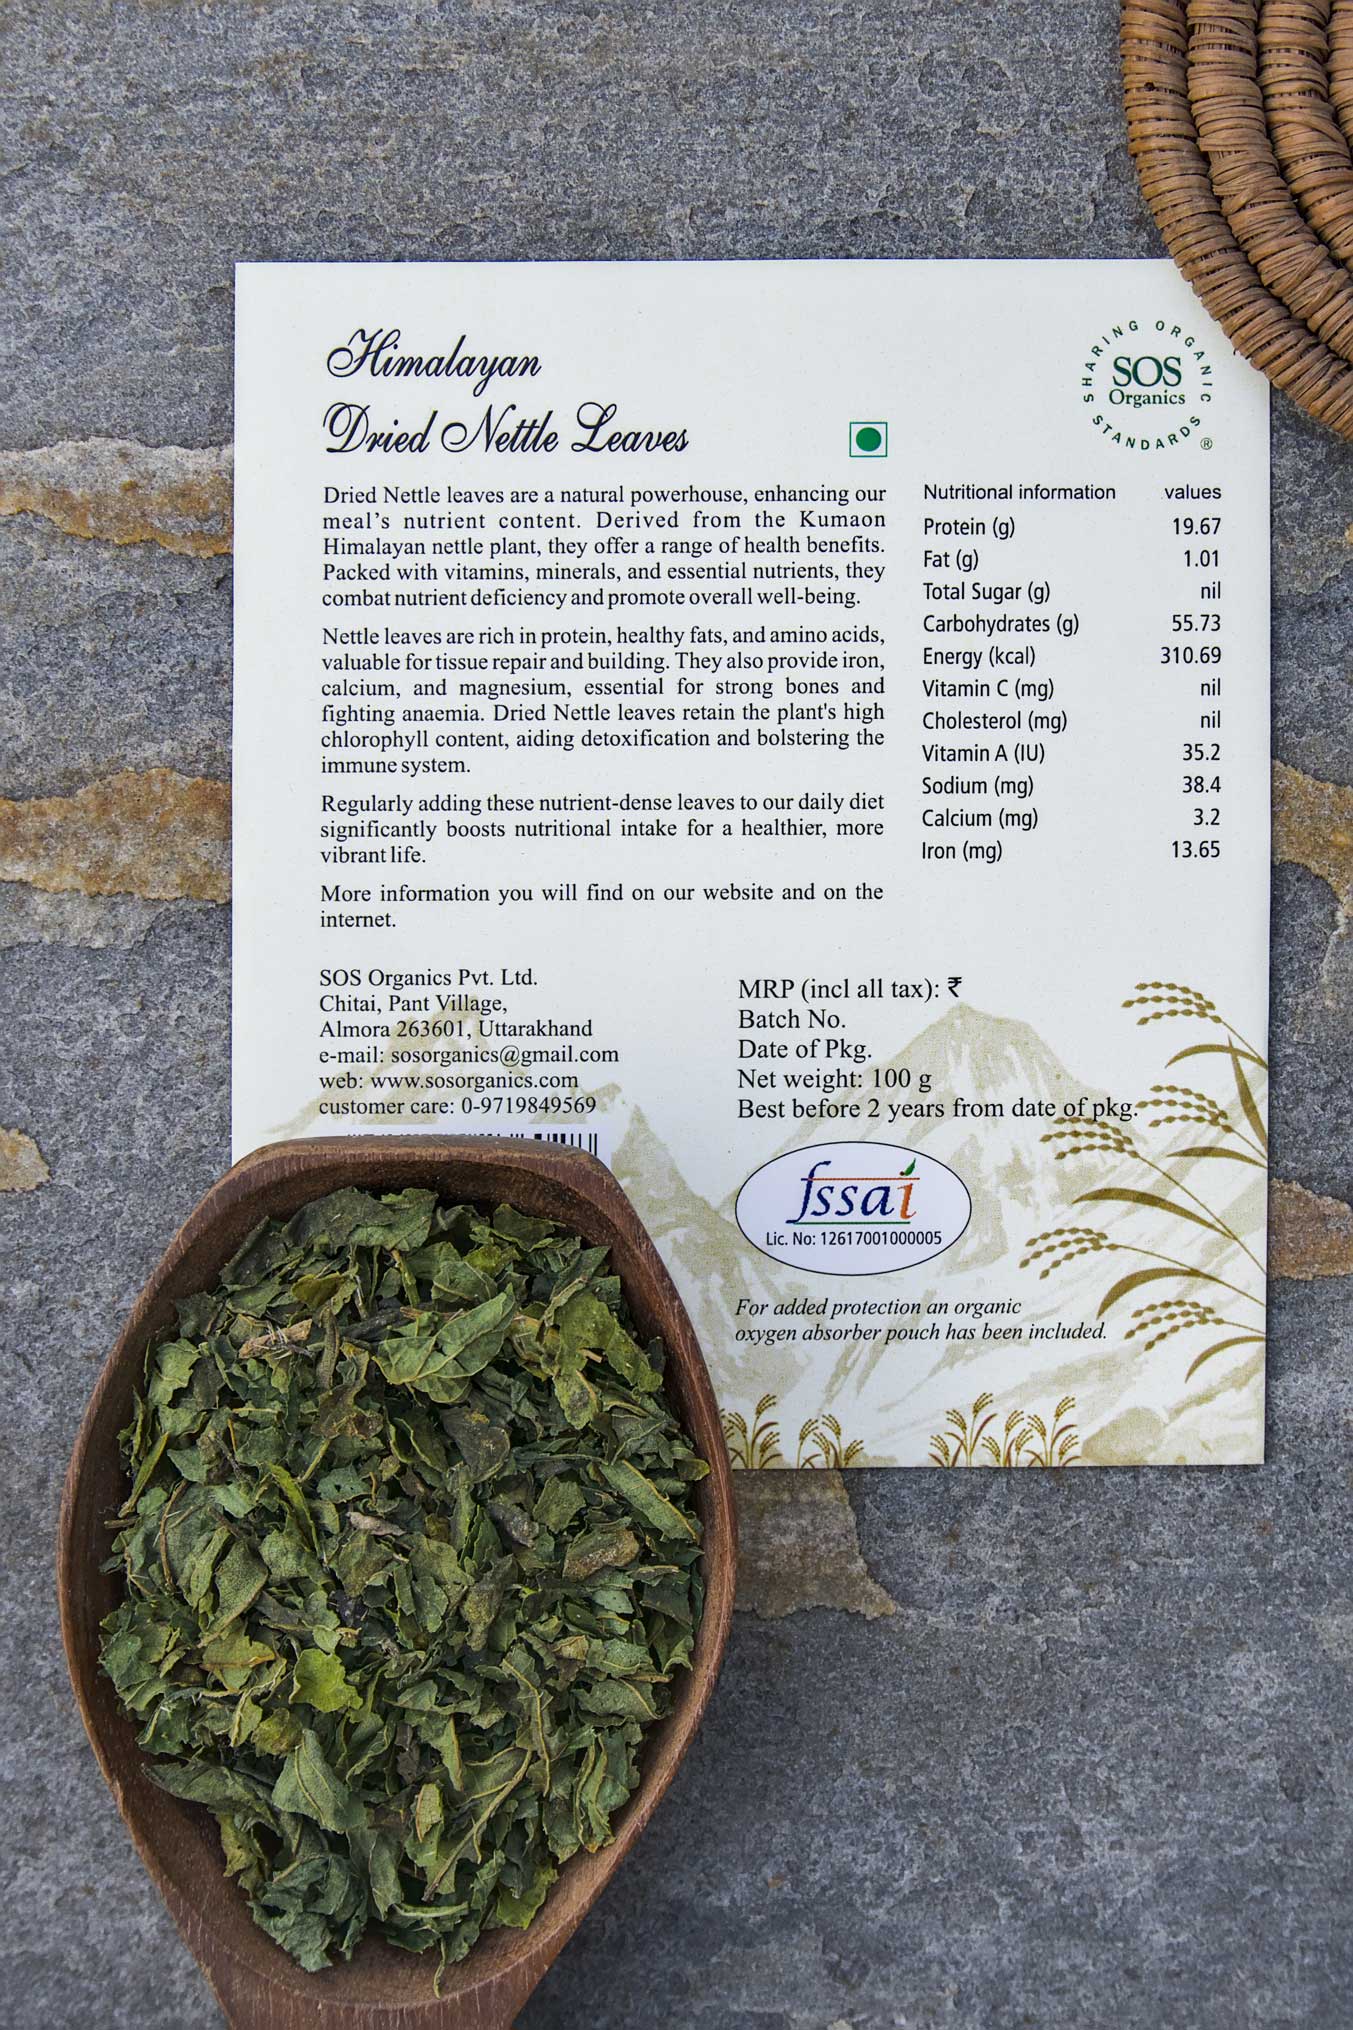 Himalayan Dried Nettle Leaves